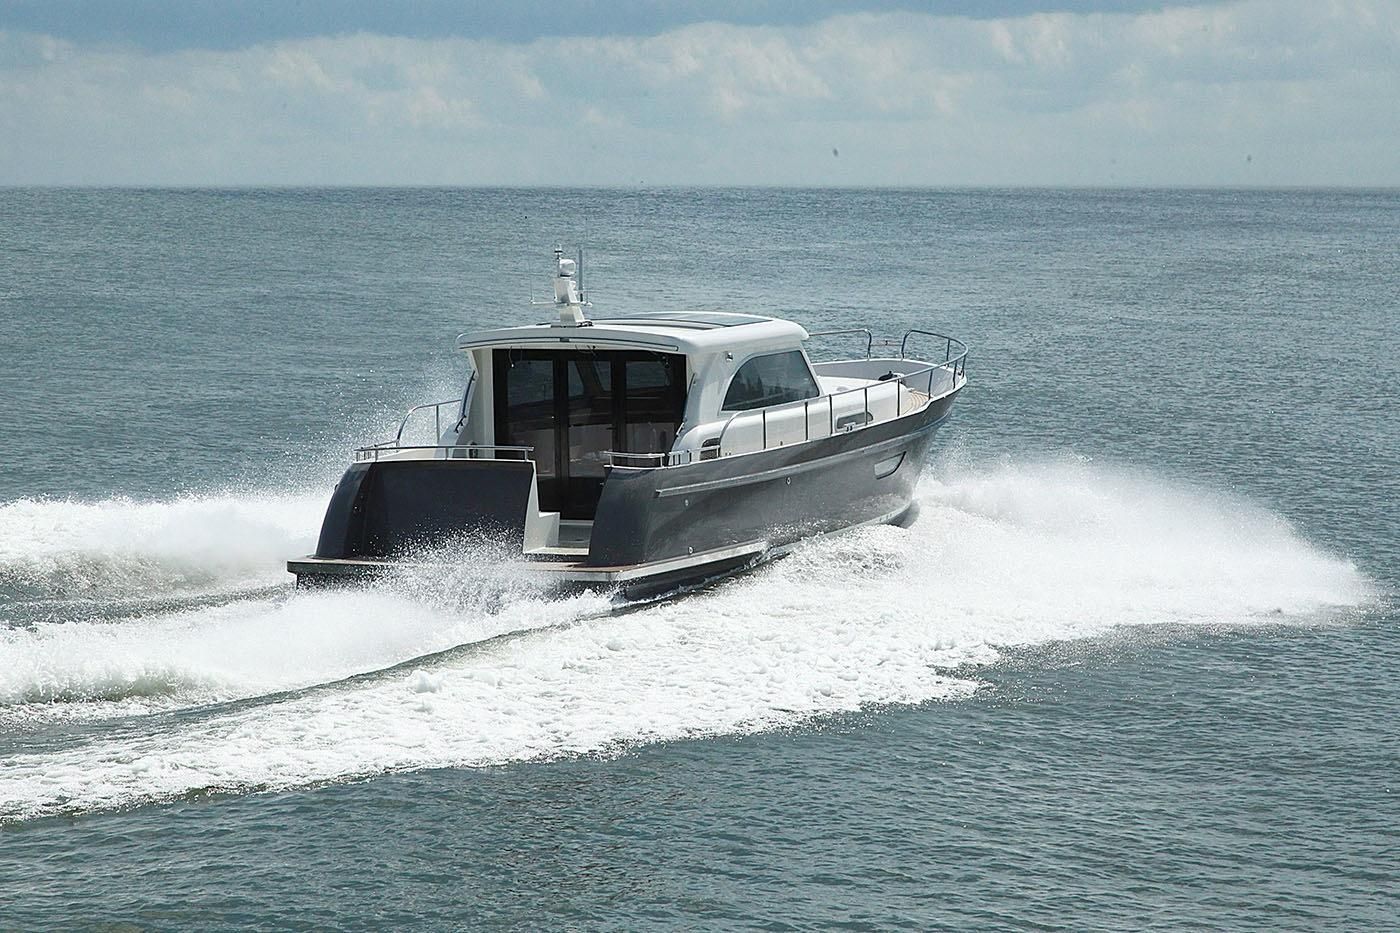 2020 Steeler NG43 Offshore Aluminium Motor Yacht for sale 